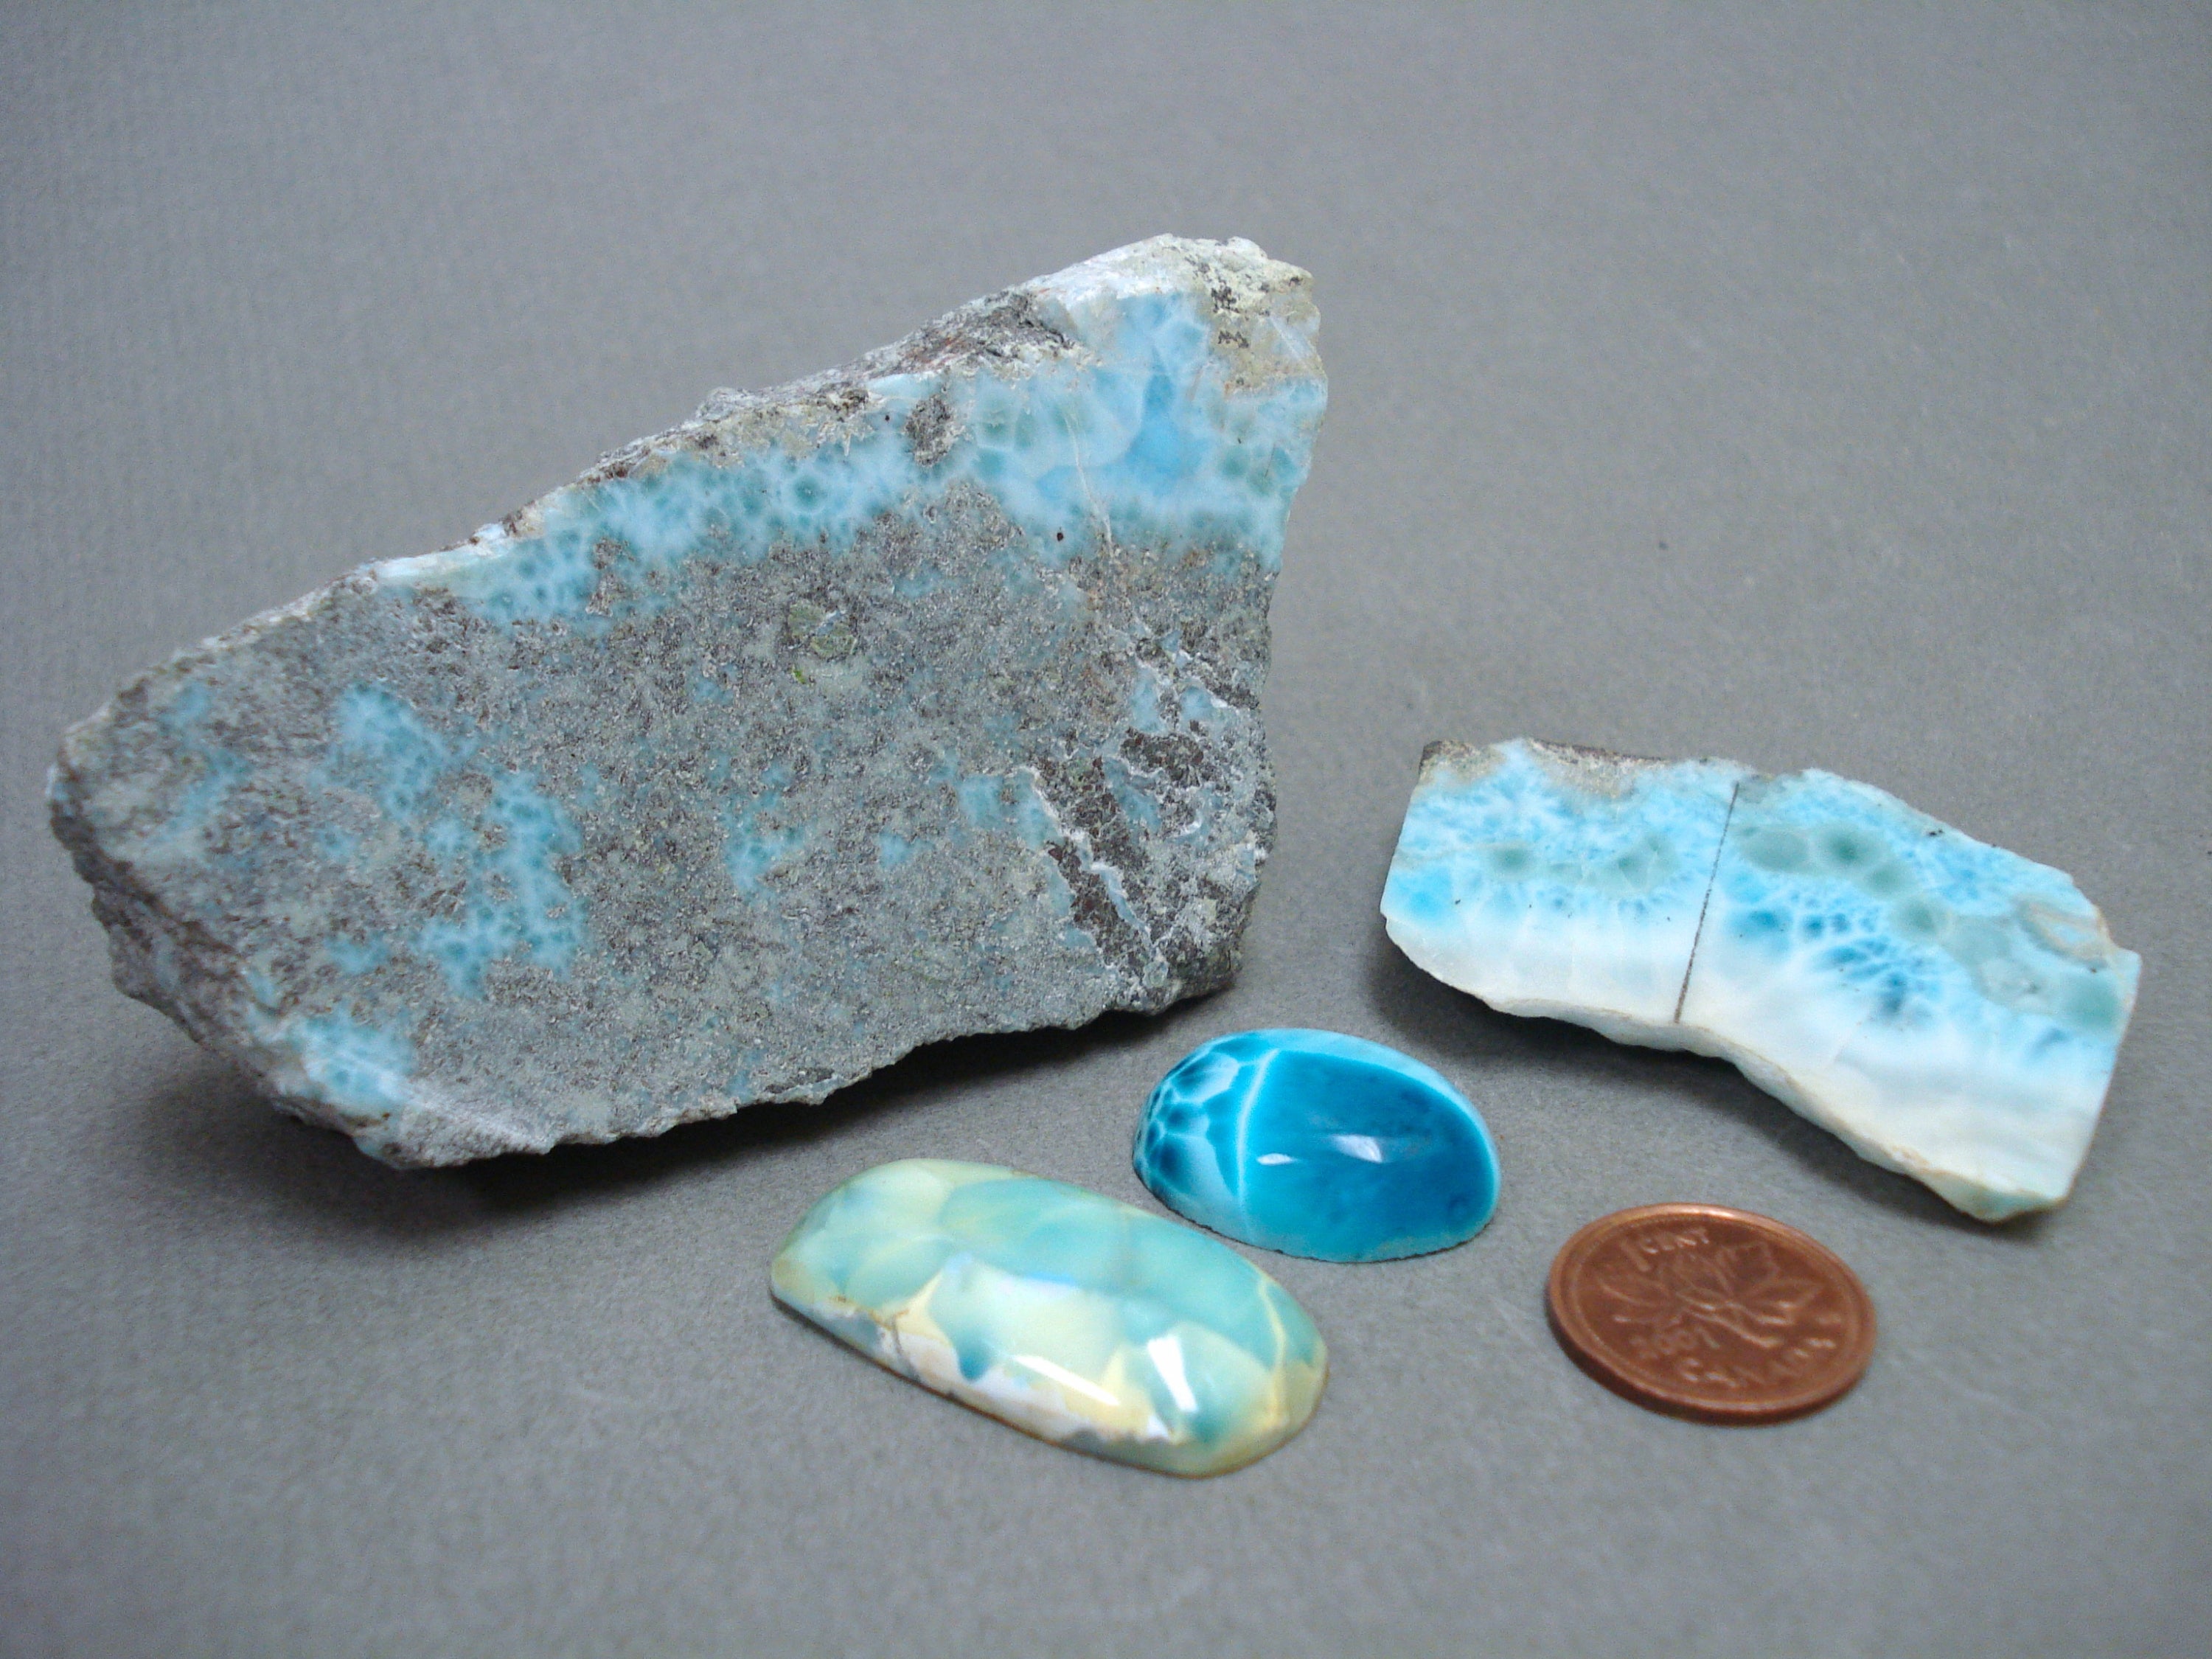 Larimar next to a penny for size comparison